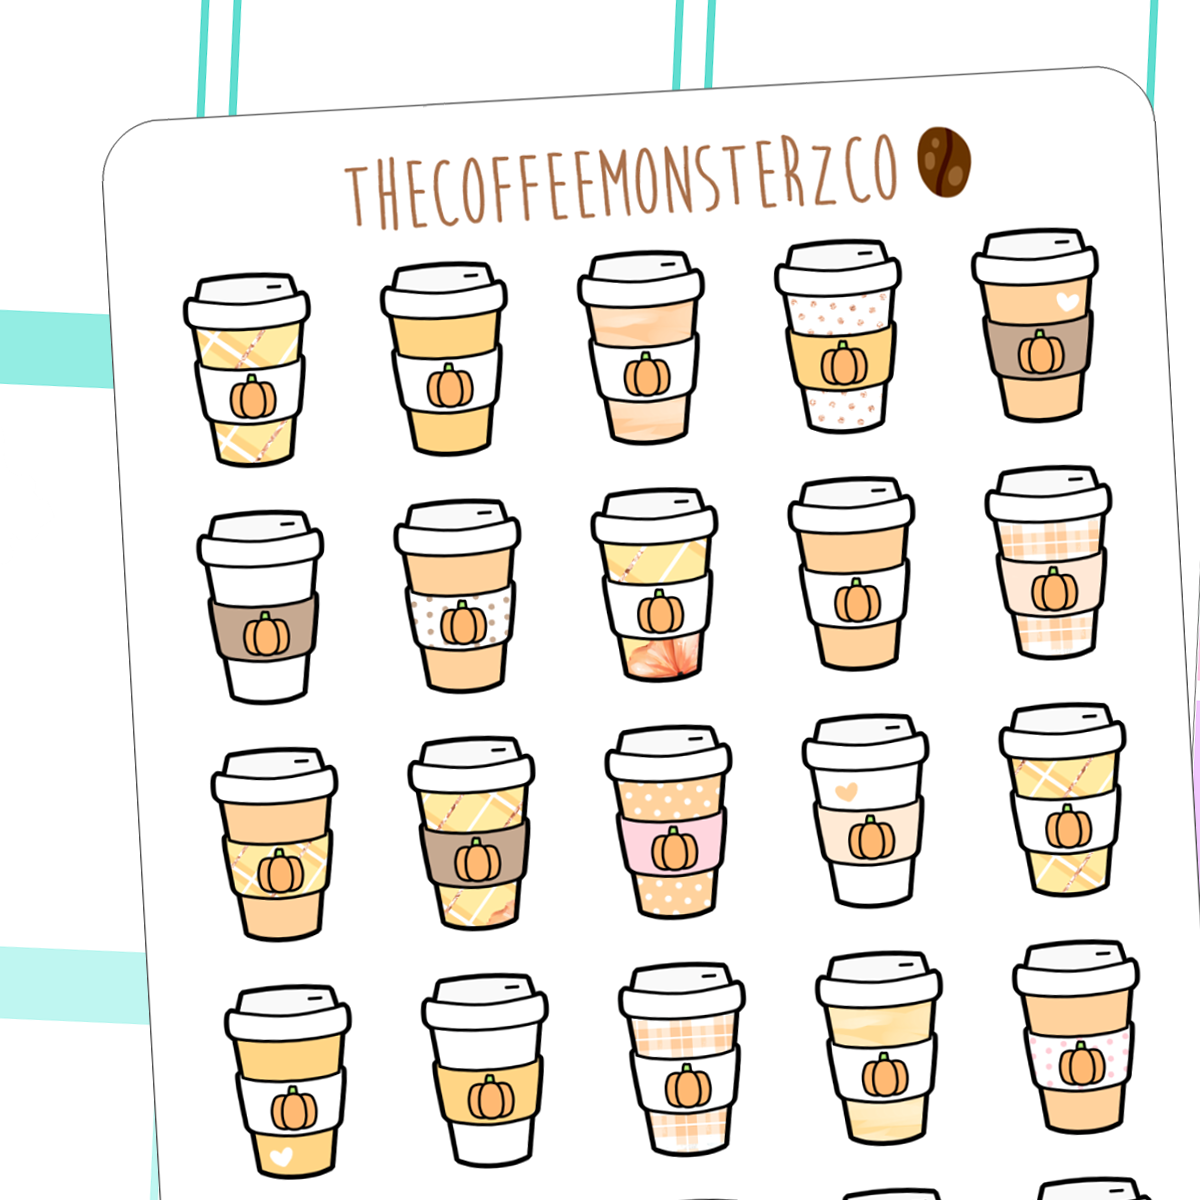 CC Coffee Cup Stickers